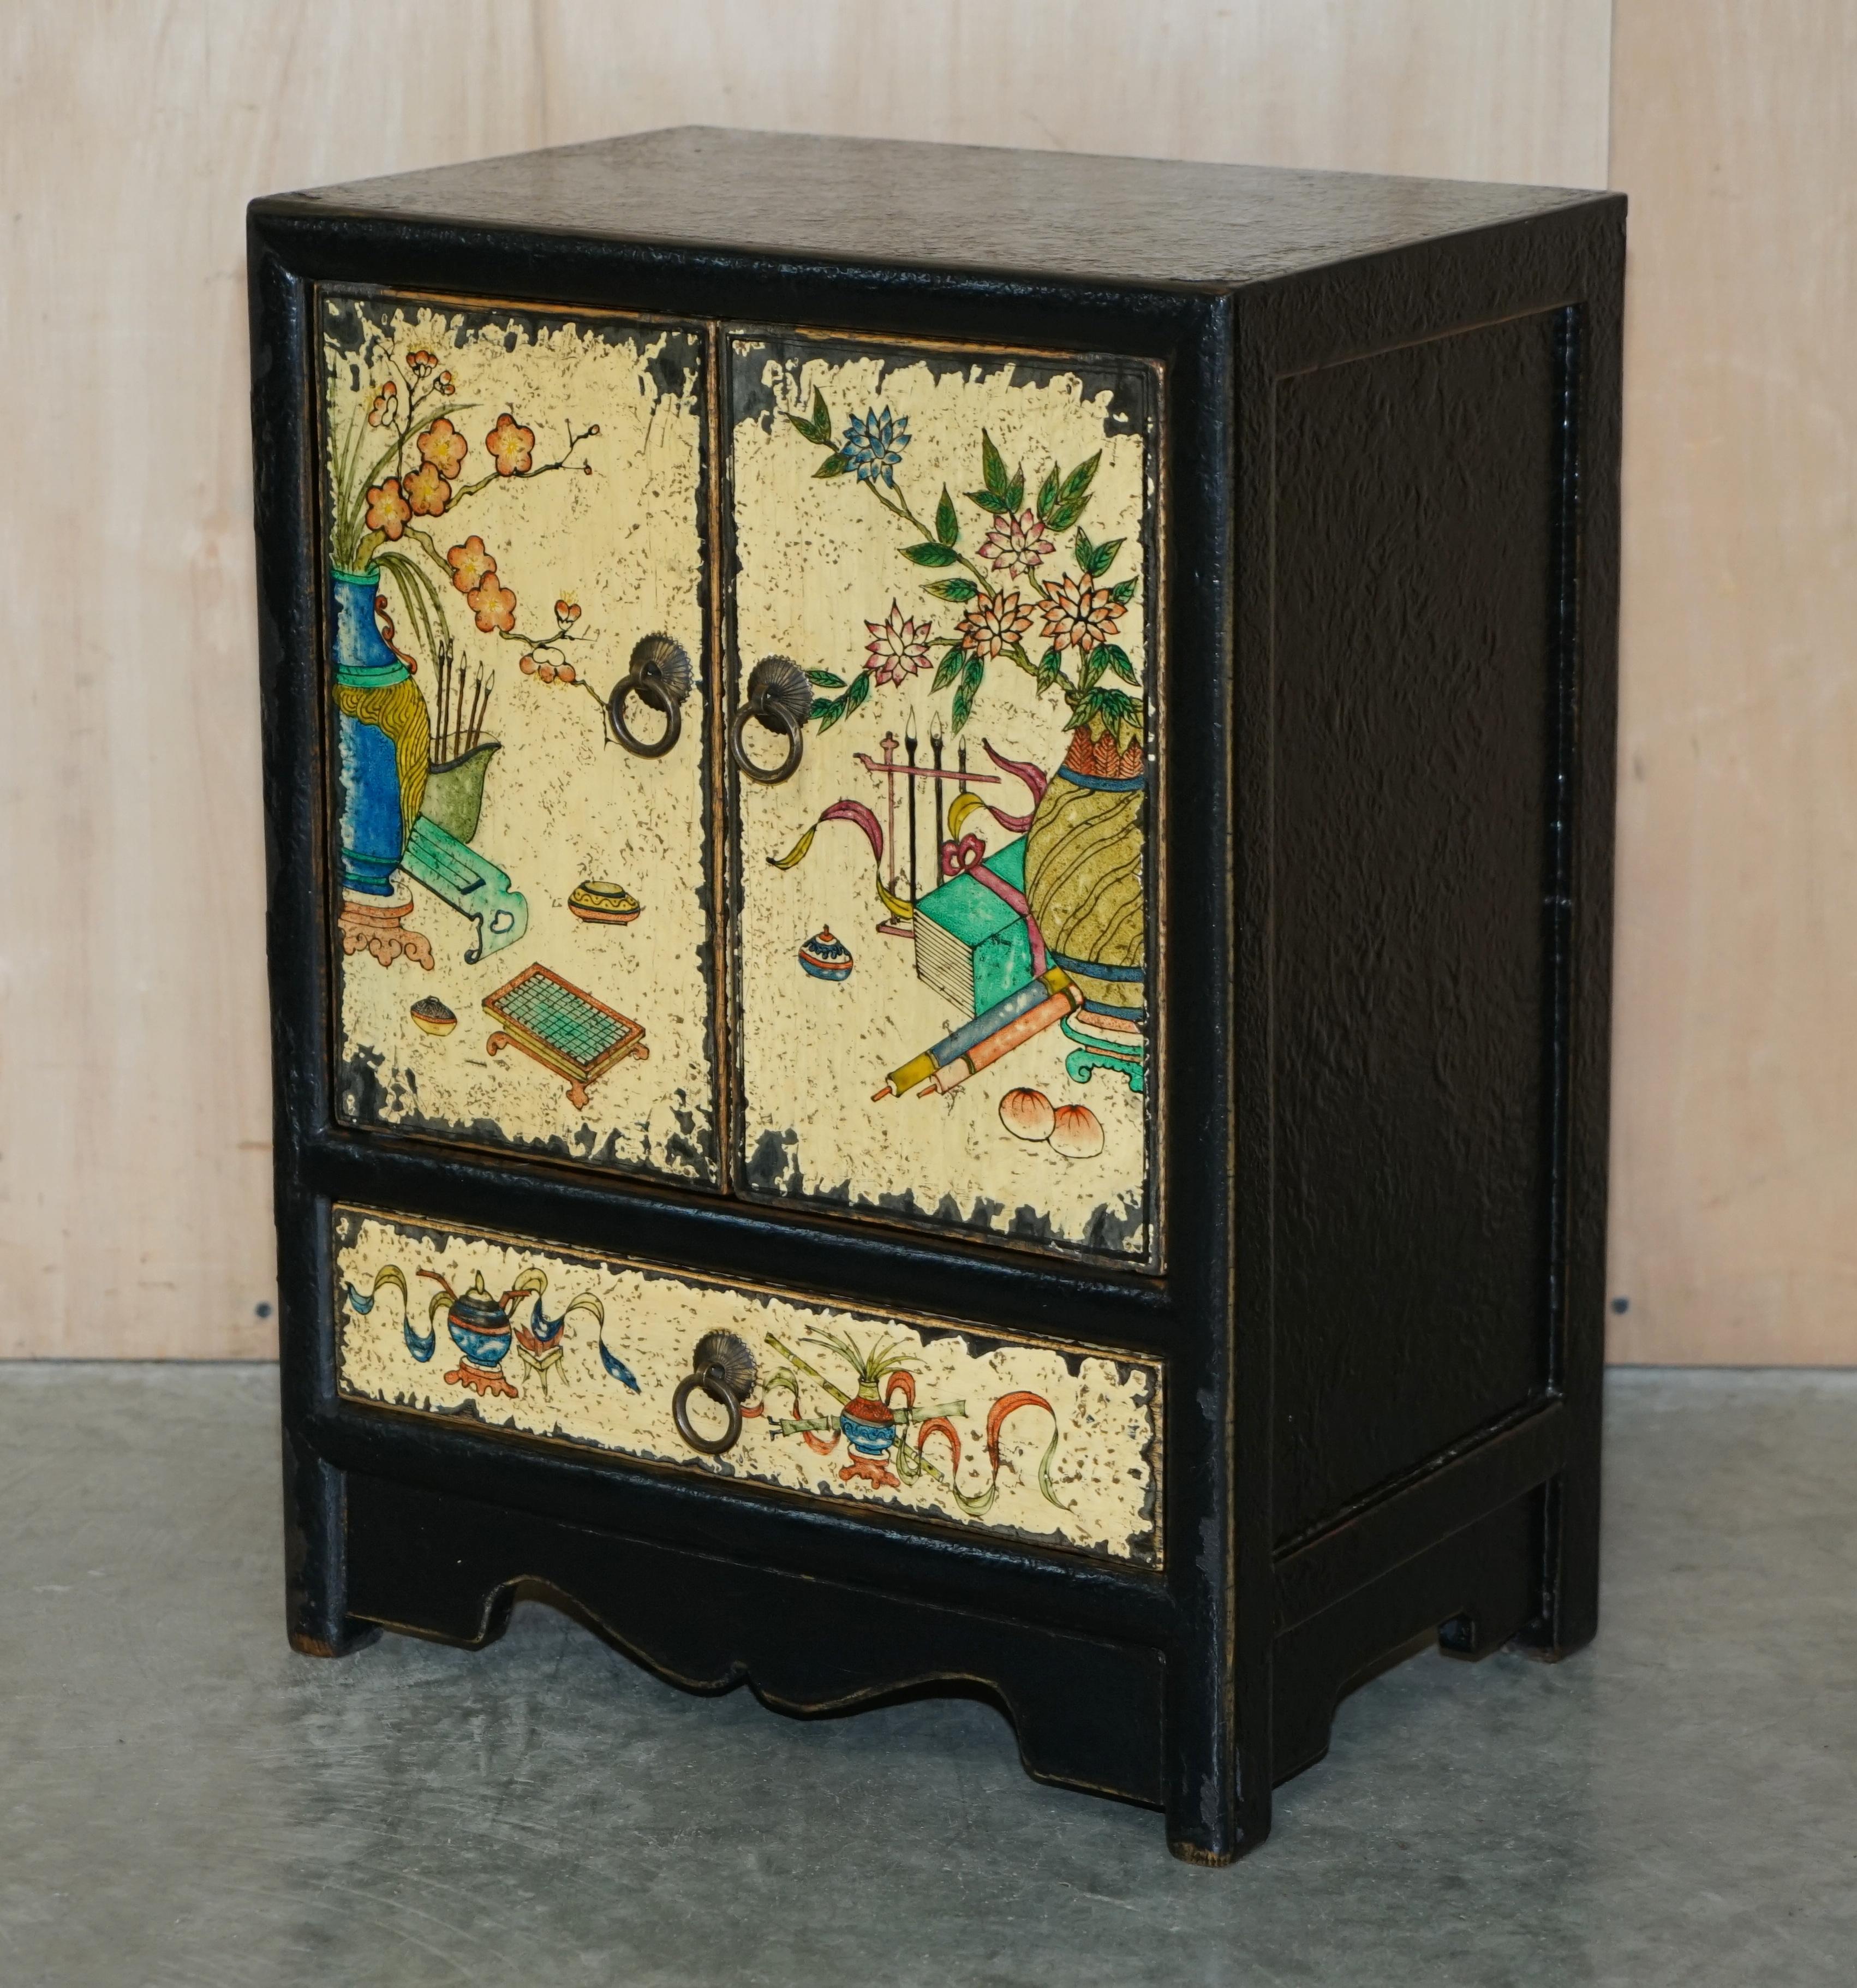 We are delighted to offer for sale this lovely pair of vintage oriental hand painted ebonized & gold leaf bedside table size cupboards with single base drawers.

A good looking and nicely made pair, they have a lovely vintage look and feel, they